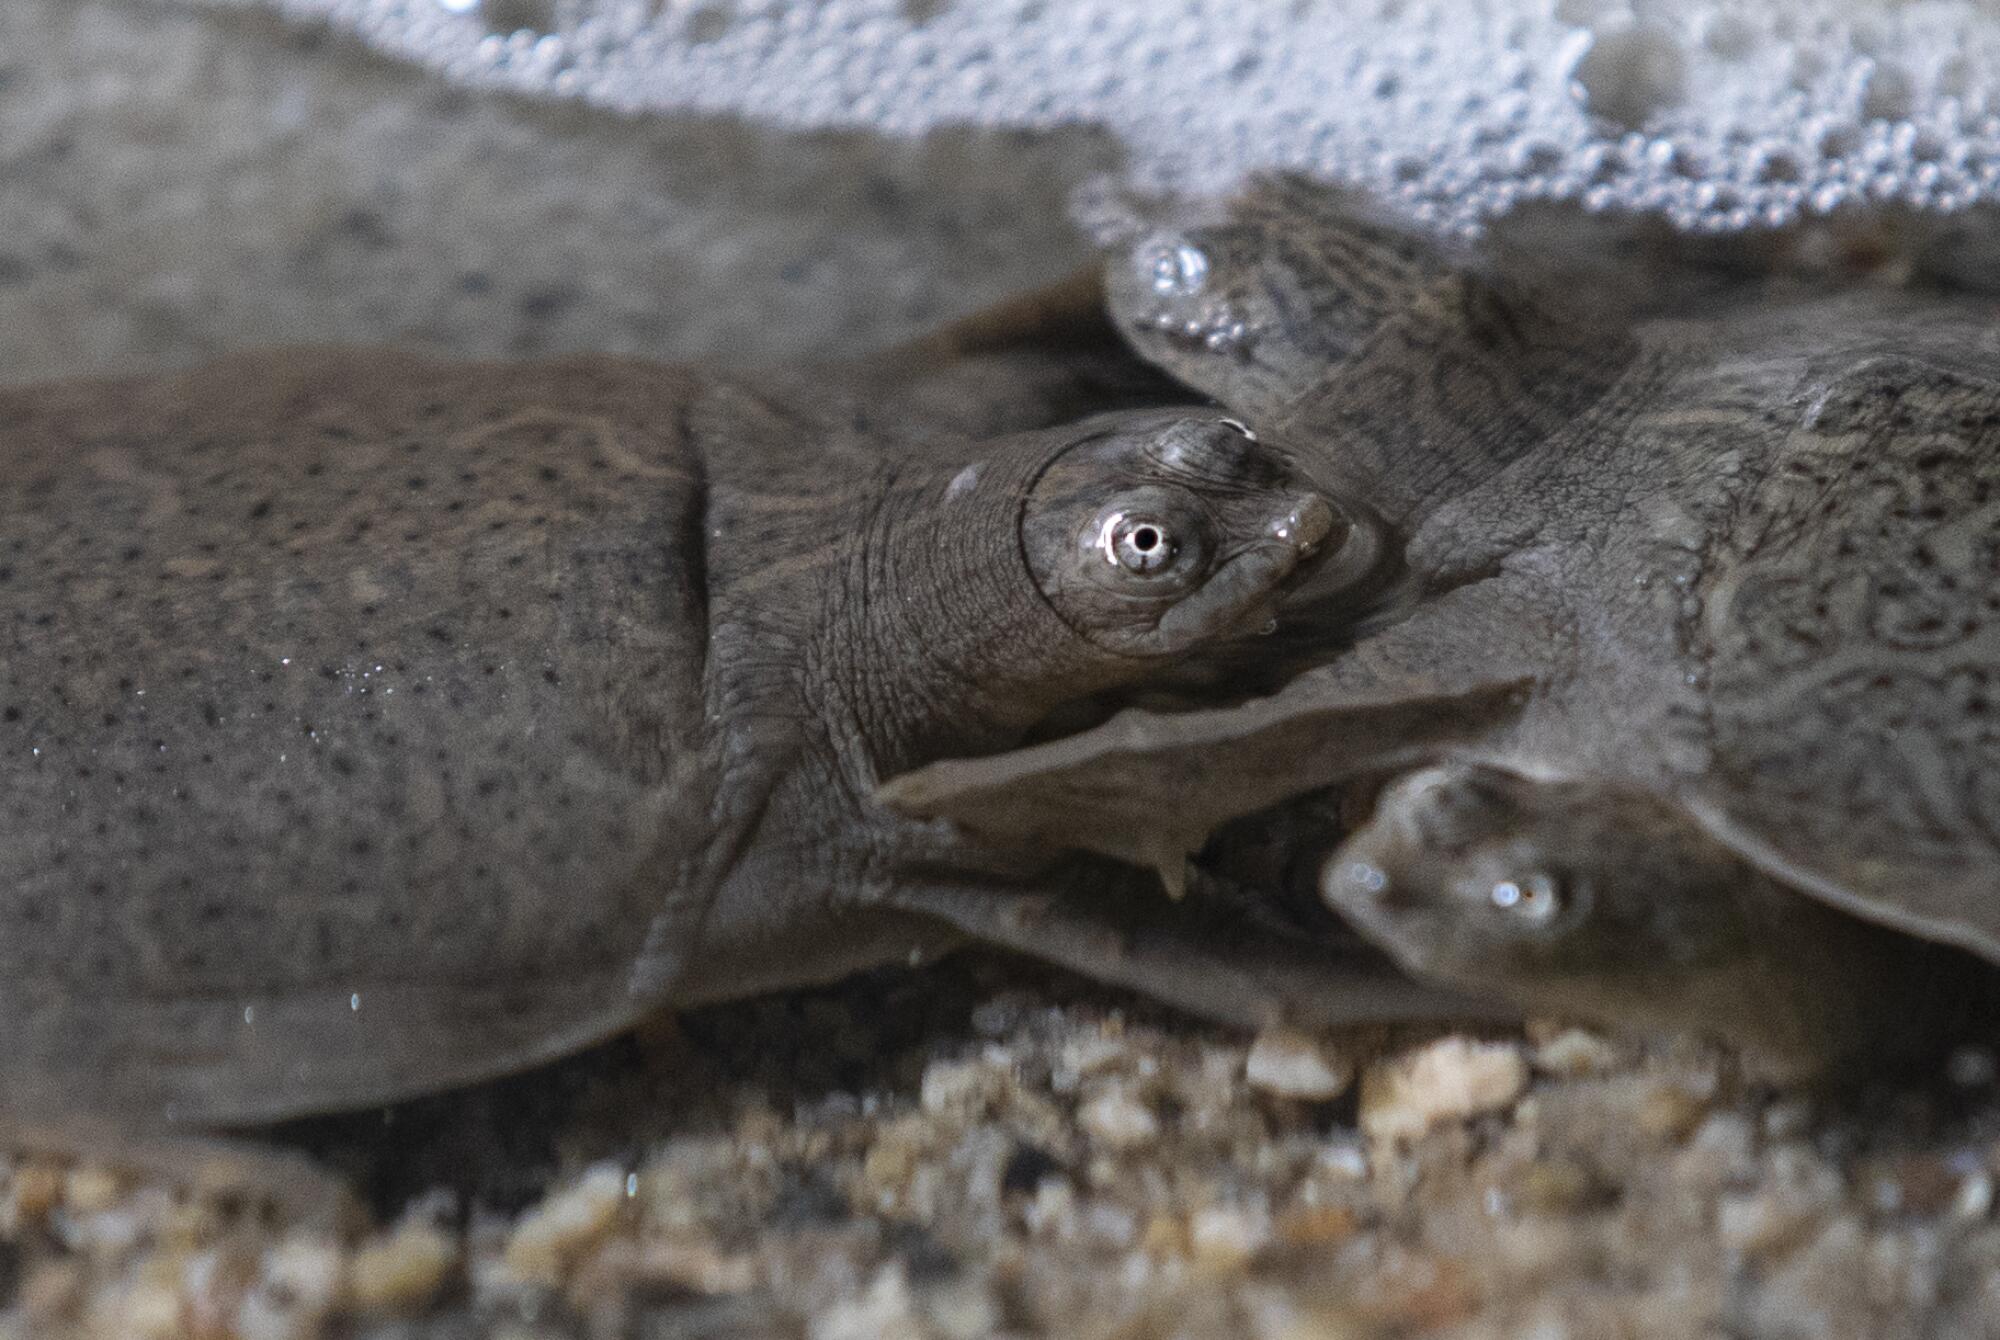 The San Diego Zoo welcomed 41 Indian narrow-headed softshell turtles this summer. 